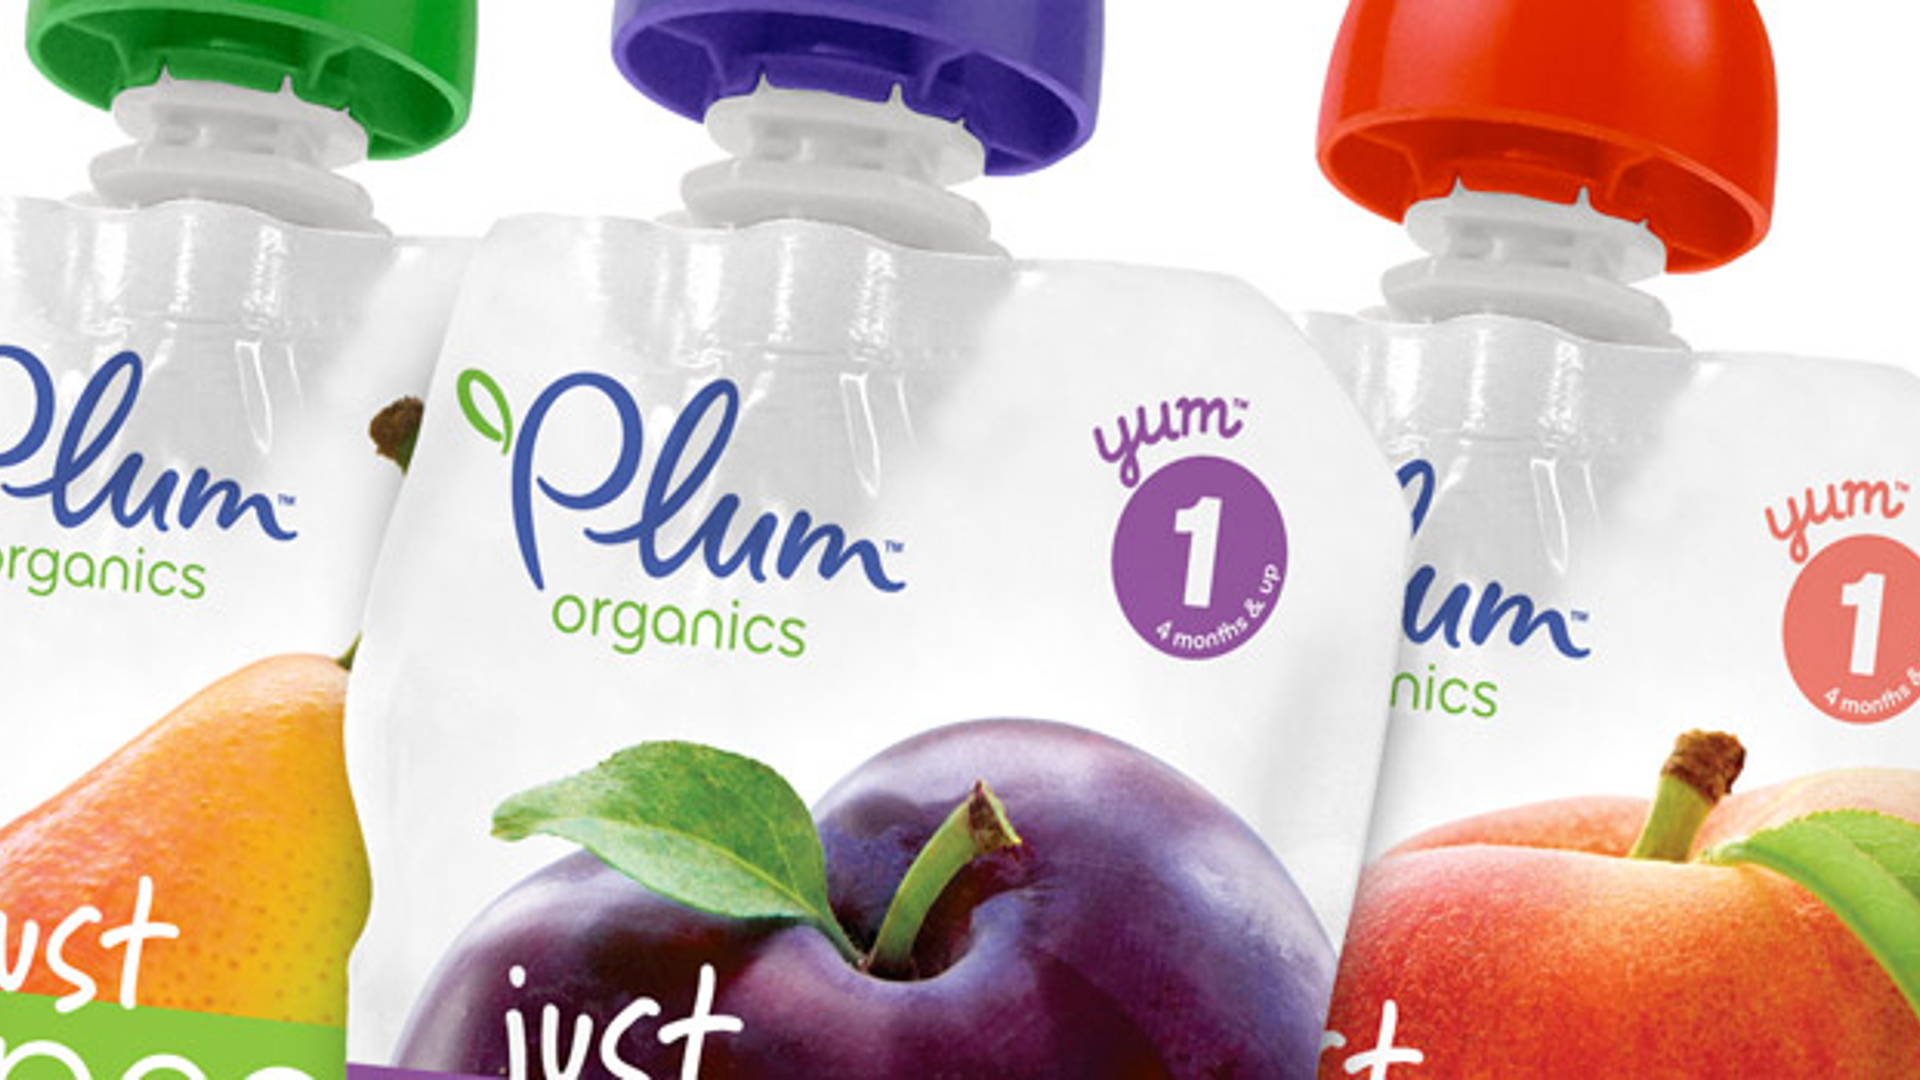 Featured image for Plum Organics - Just Fruits Redesign